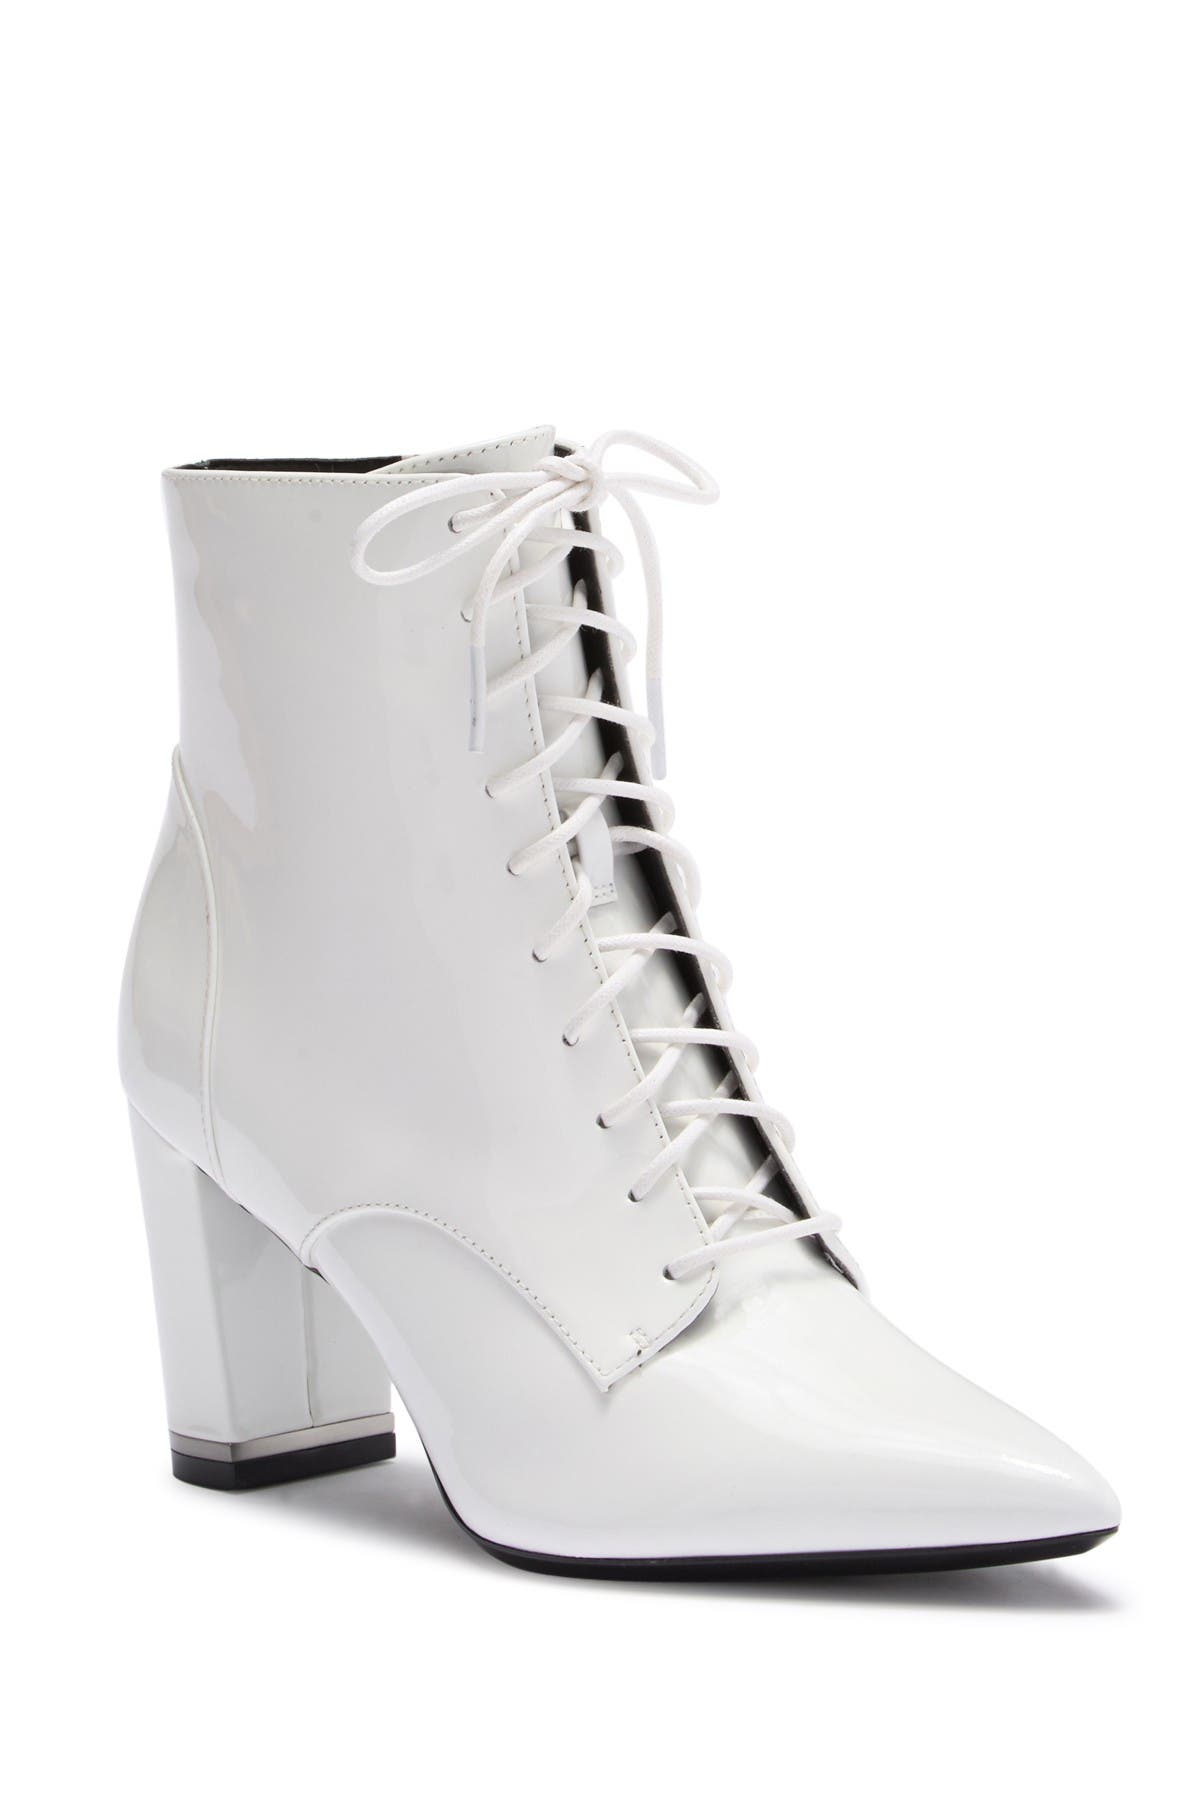 calvin klein patent leather boots